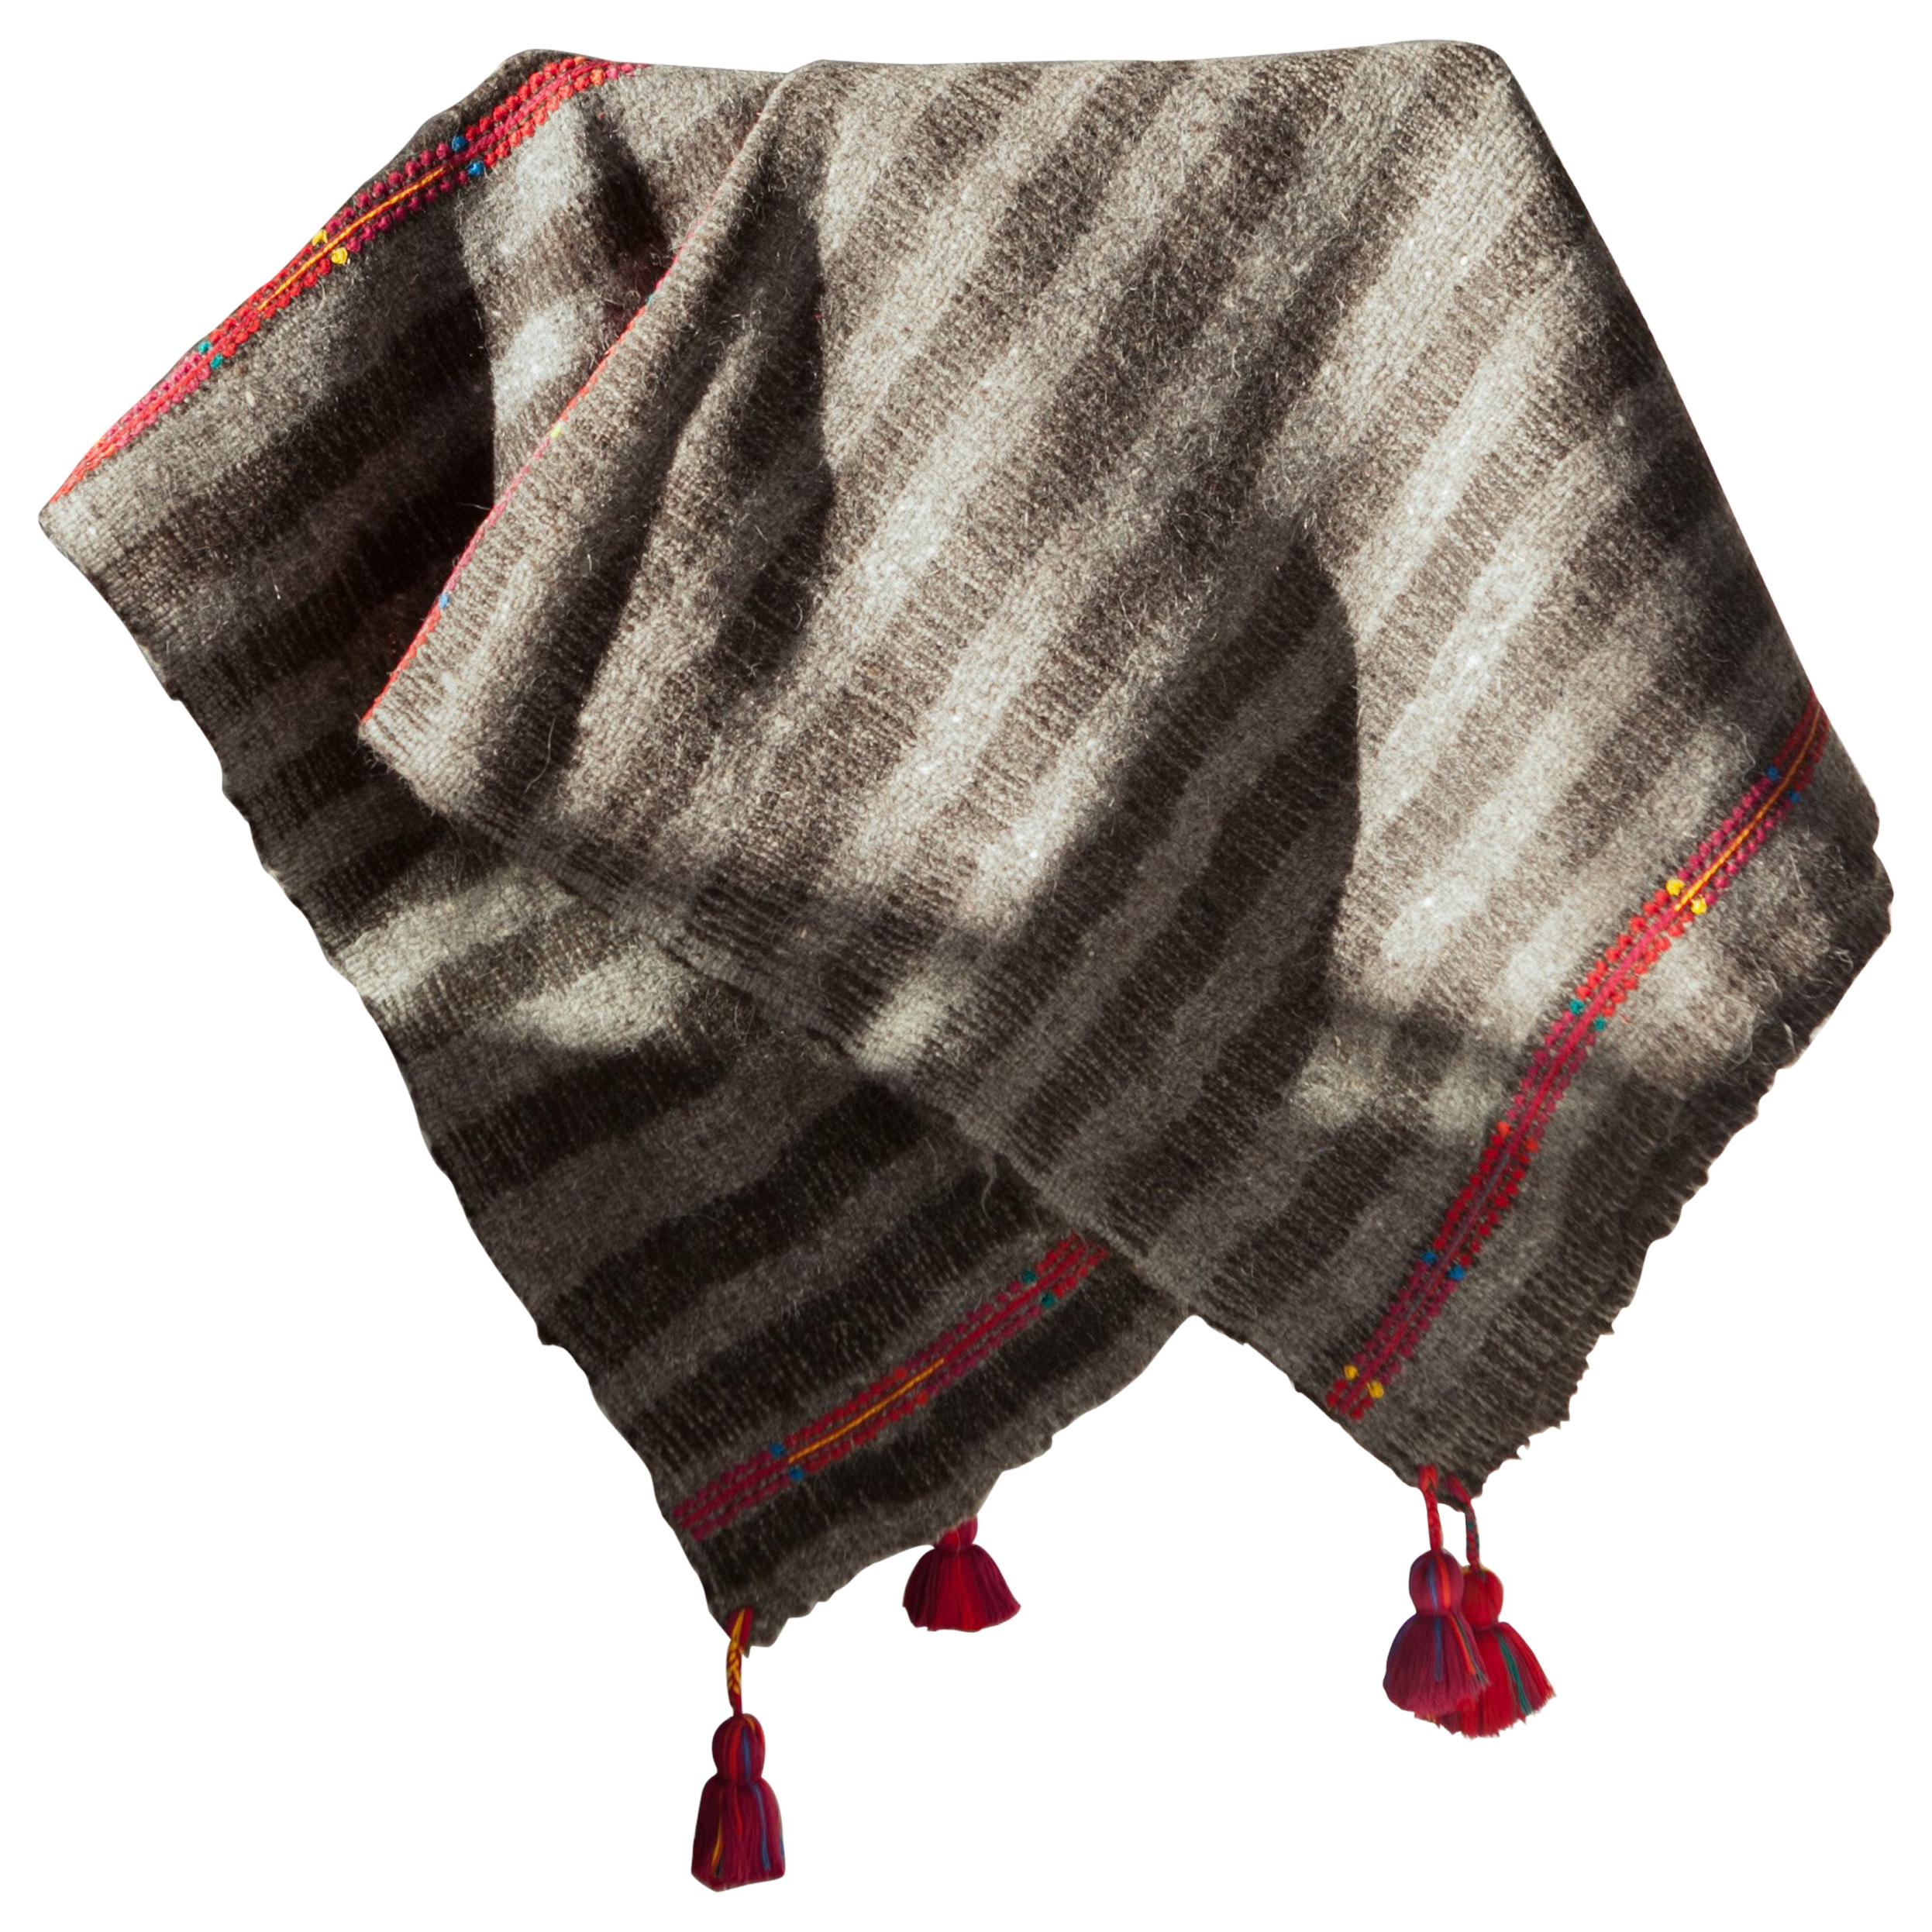 One of a Kind Handwoven Wool Throw in Dark Grey with Red Tassels, in Stock